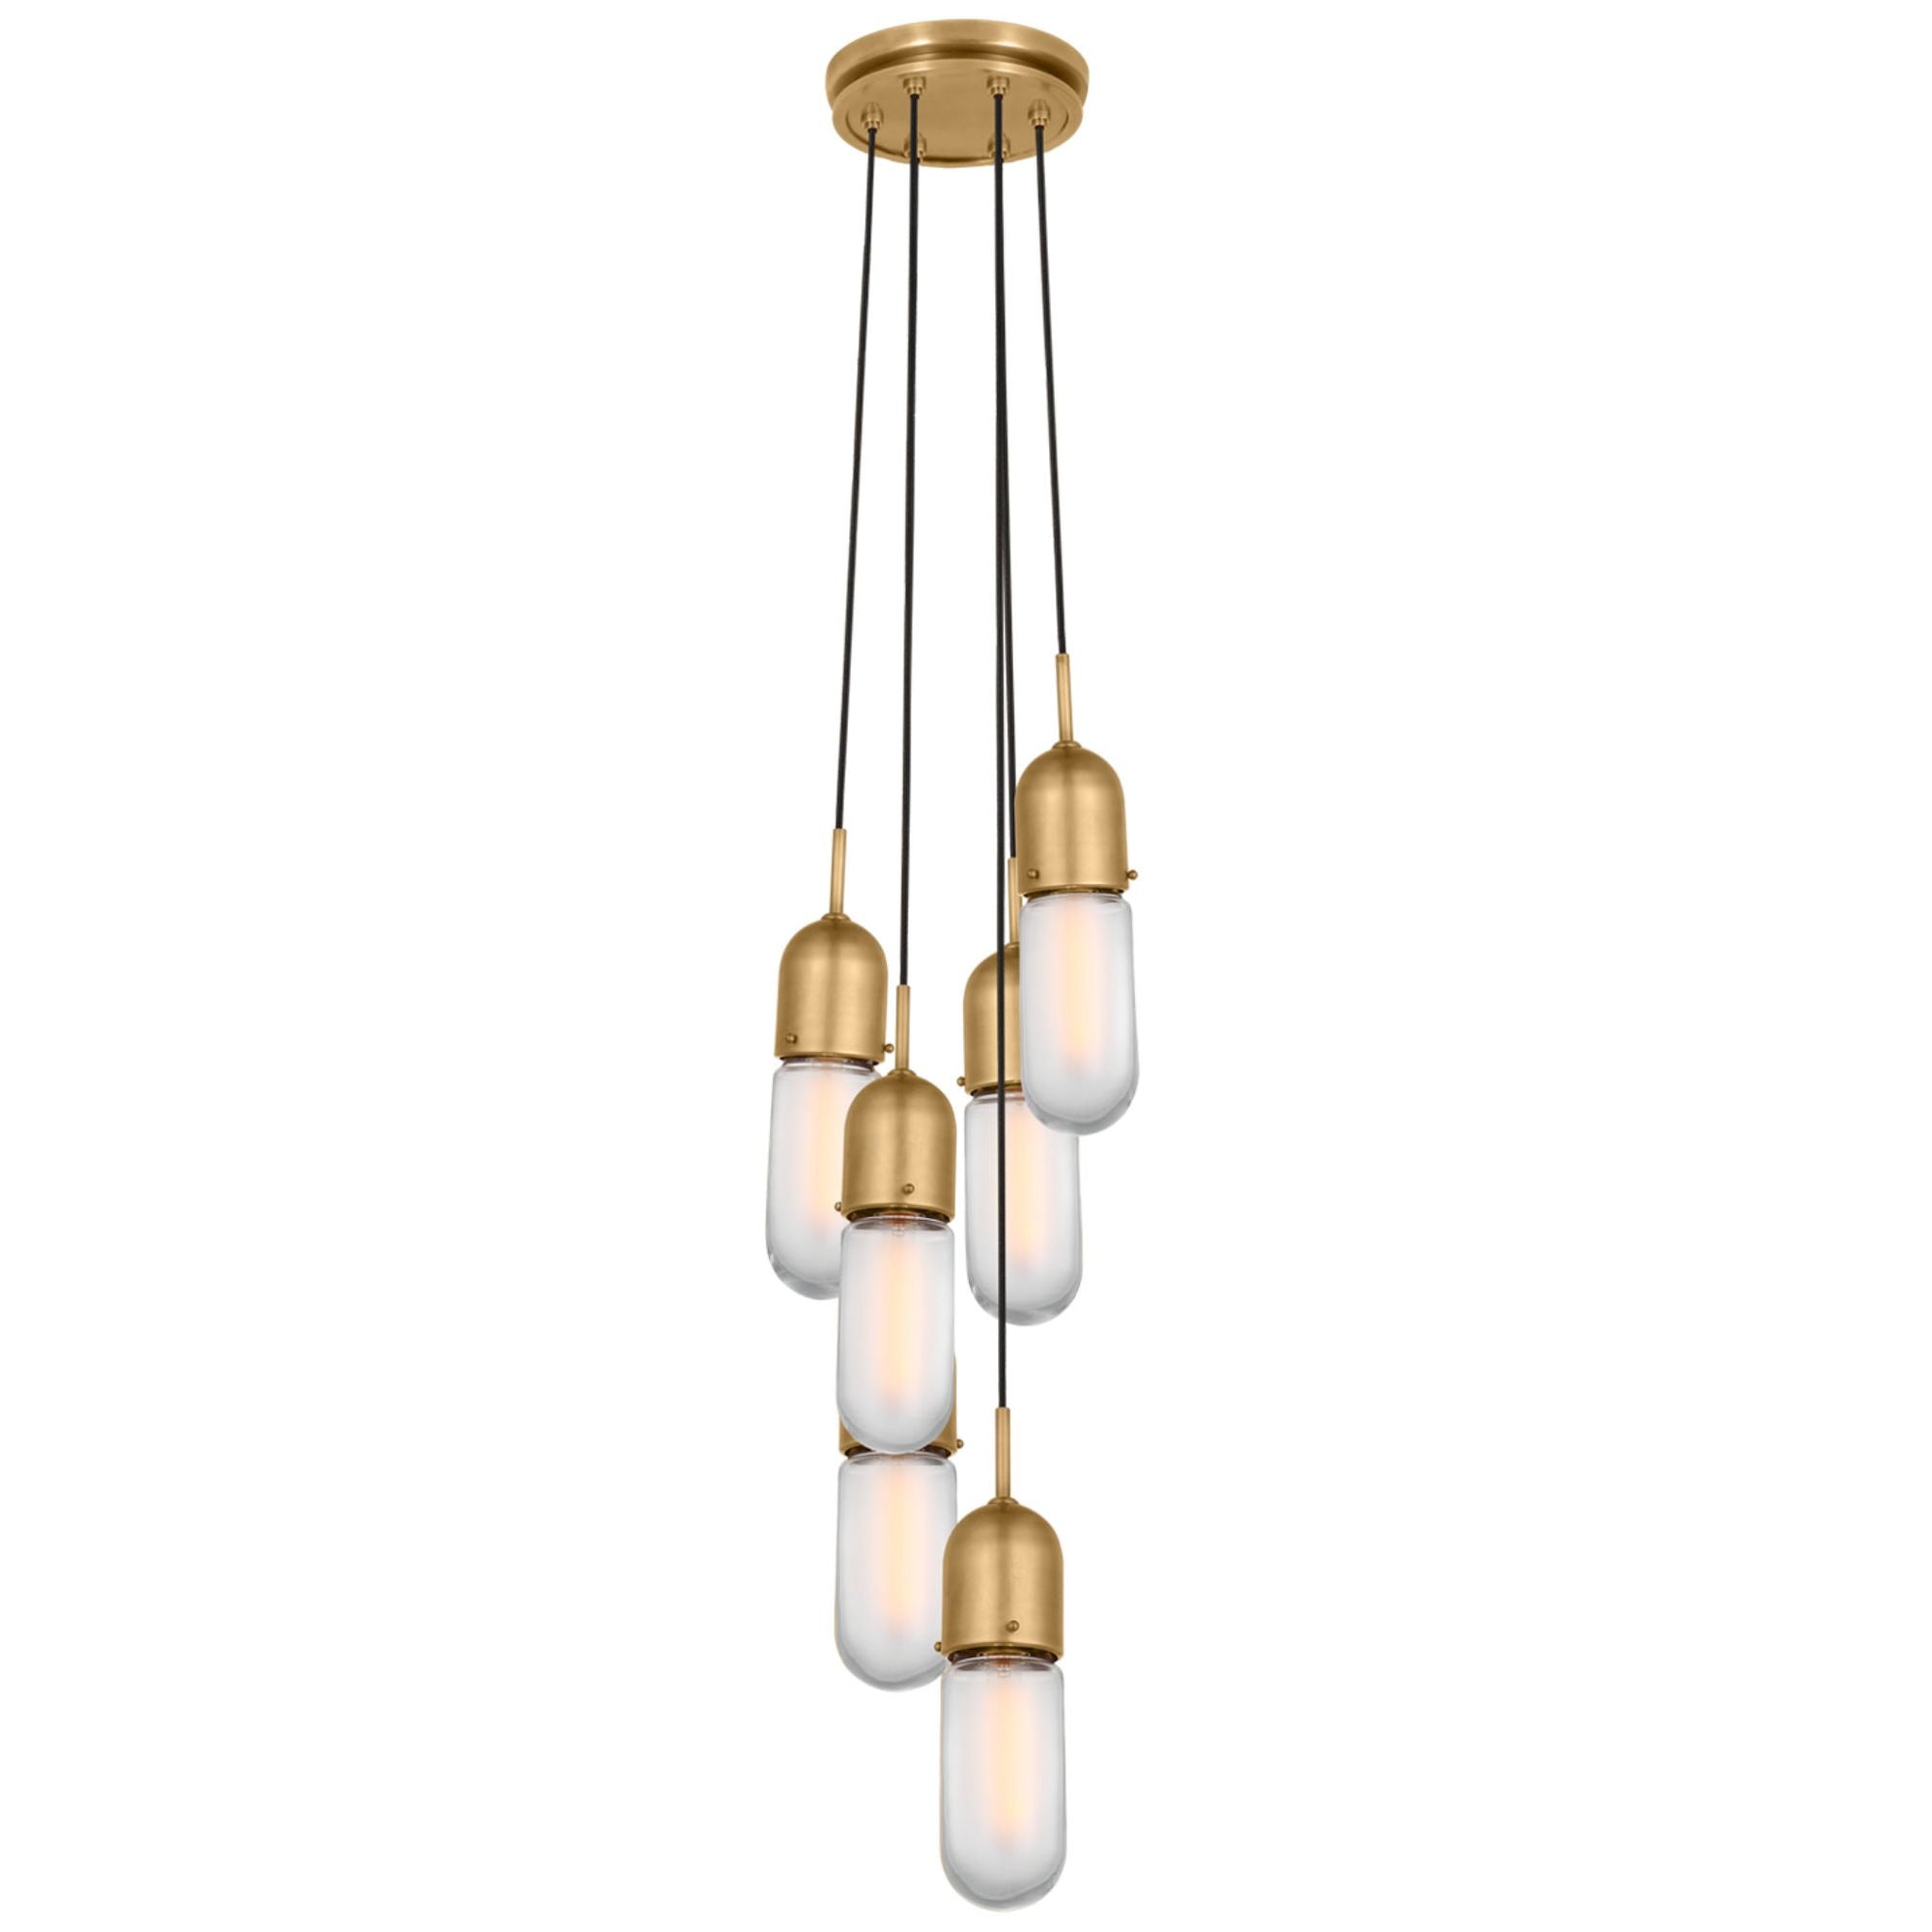 Thomas O'Brien Junio 6-Light Pendant in Hand-Rubbed Antique Brass with Frosted Glass